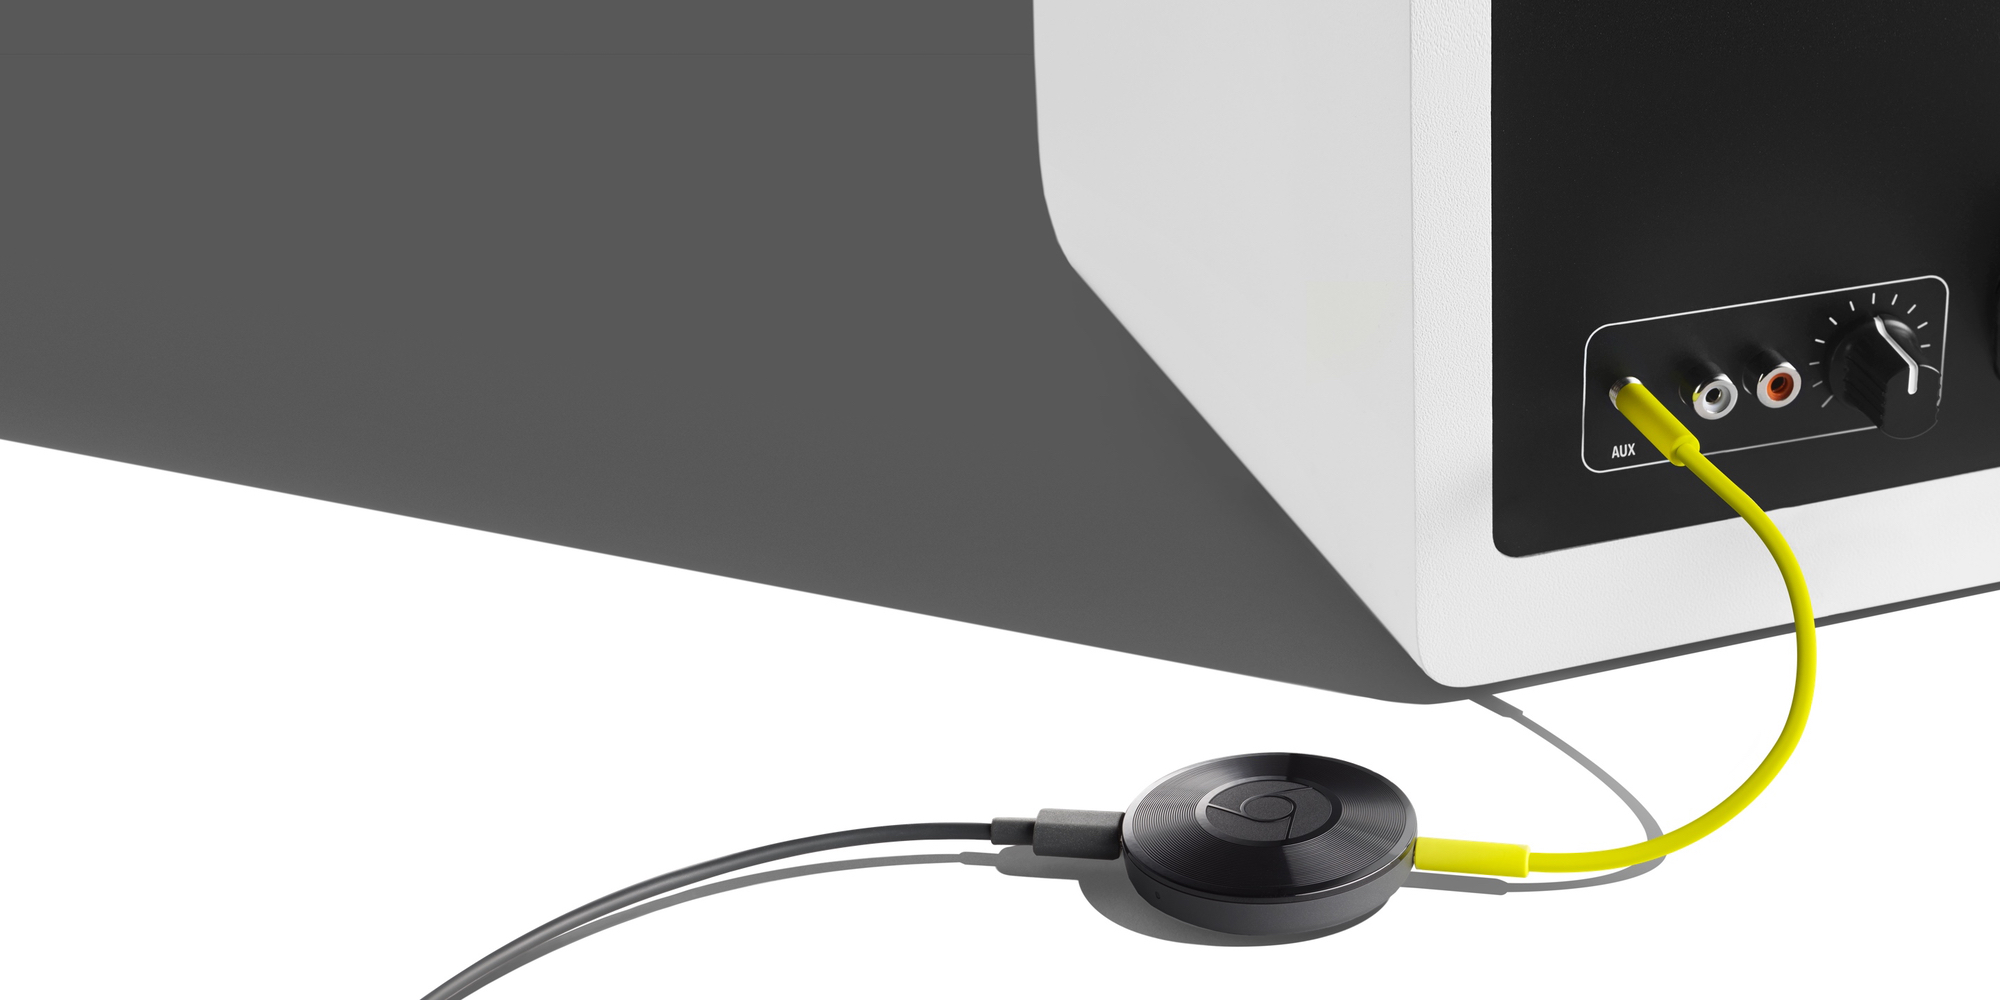 Bolt puls At håndtere Google says it is discontinuing the Chromecast Audio